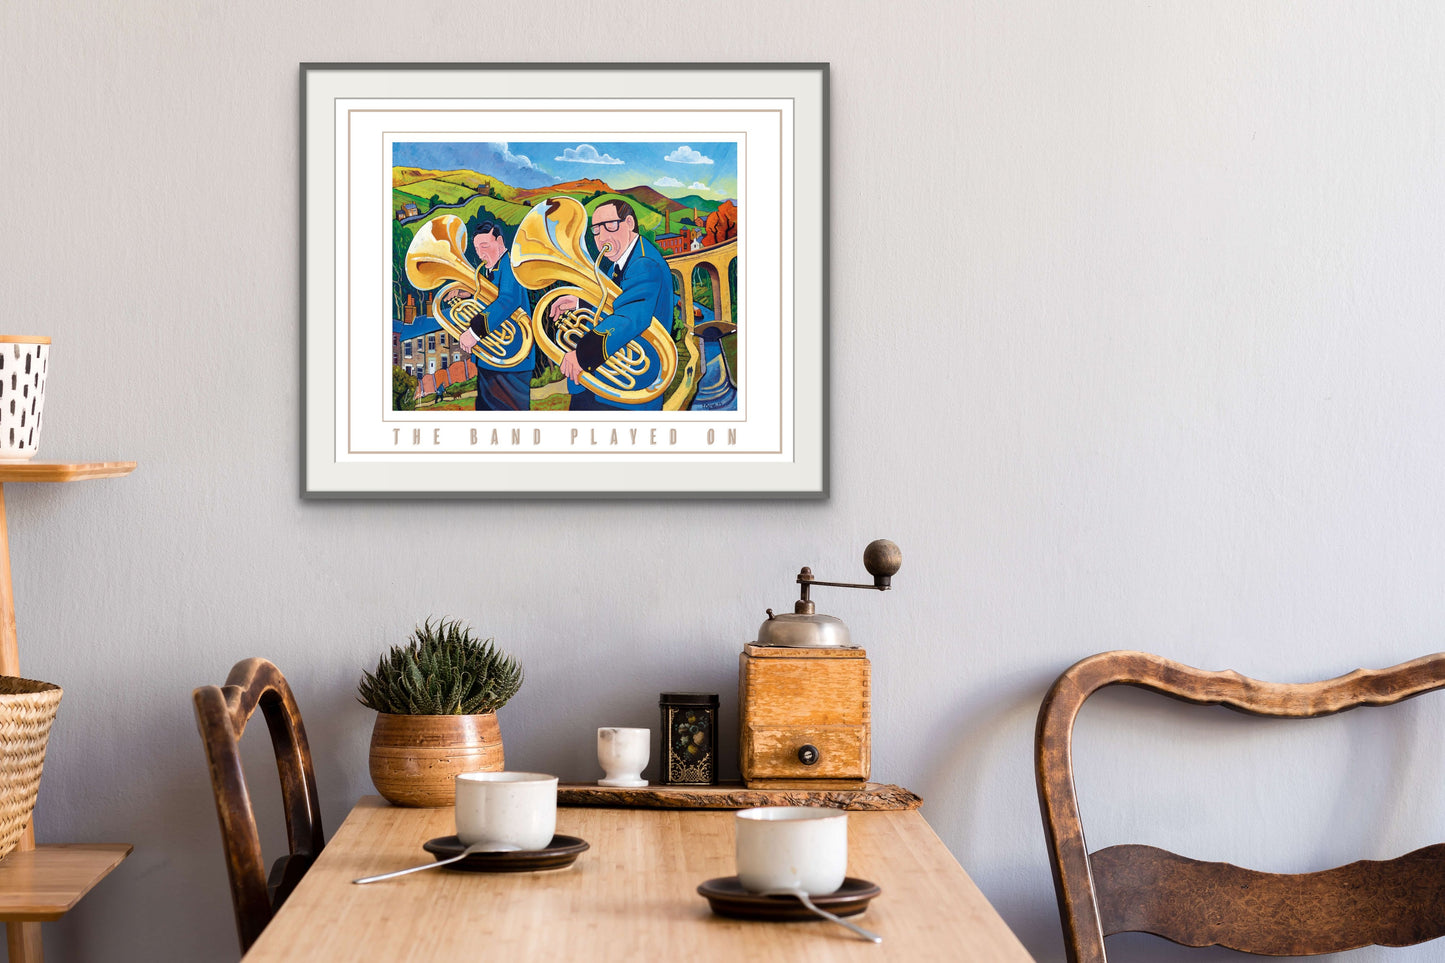 *NEW* the band played on ~ Special Edition Poster Print